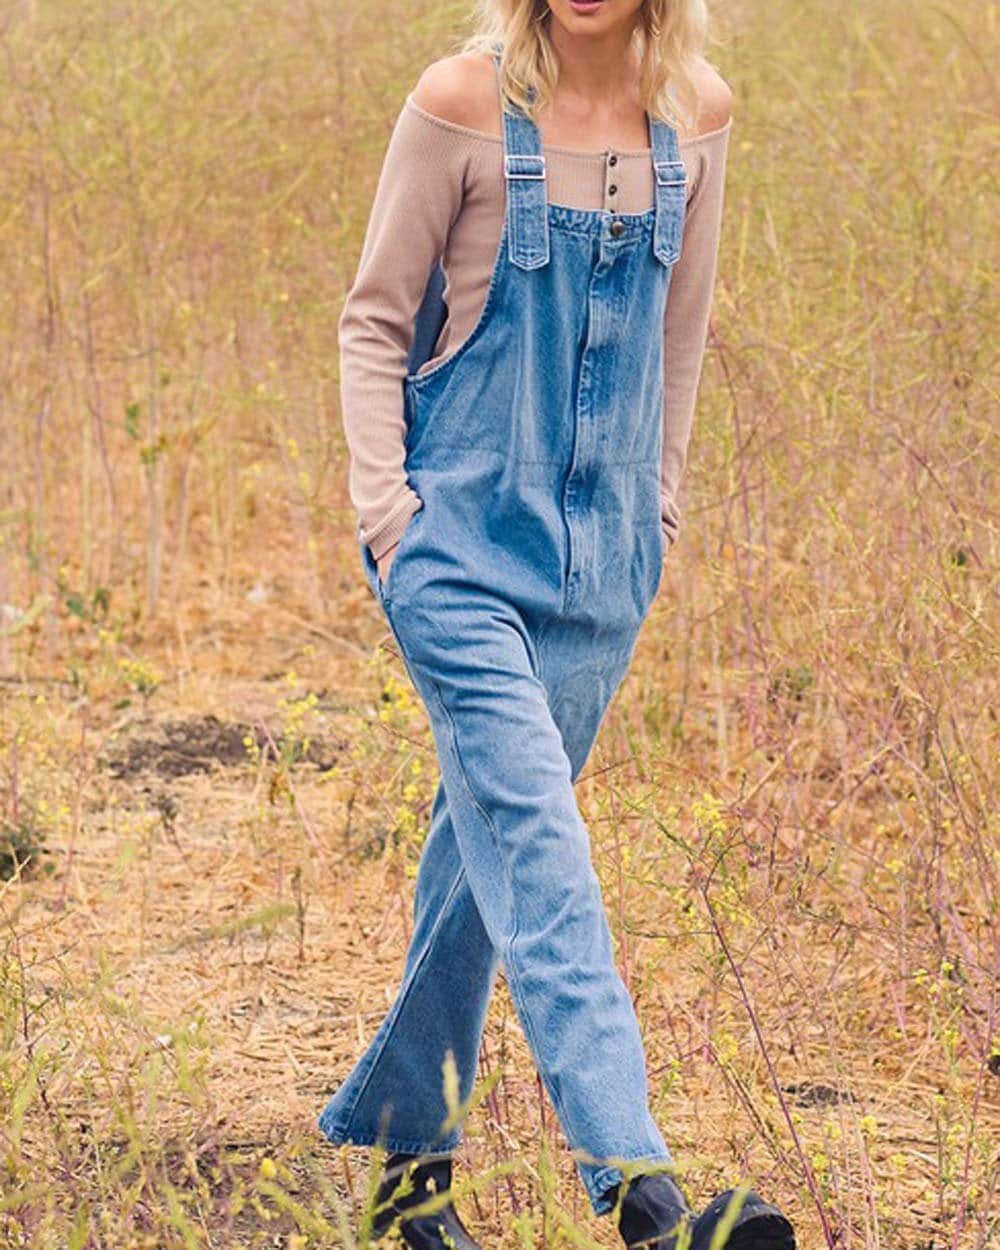 Soft Denim Slouchy Cute Cotton Overalls Jumpsuit Coveralls Work Wear Artist  Painter Women's Small Medium or Large 